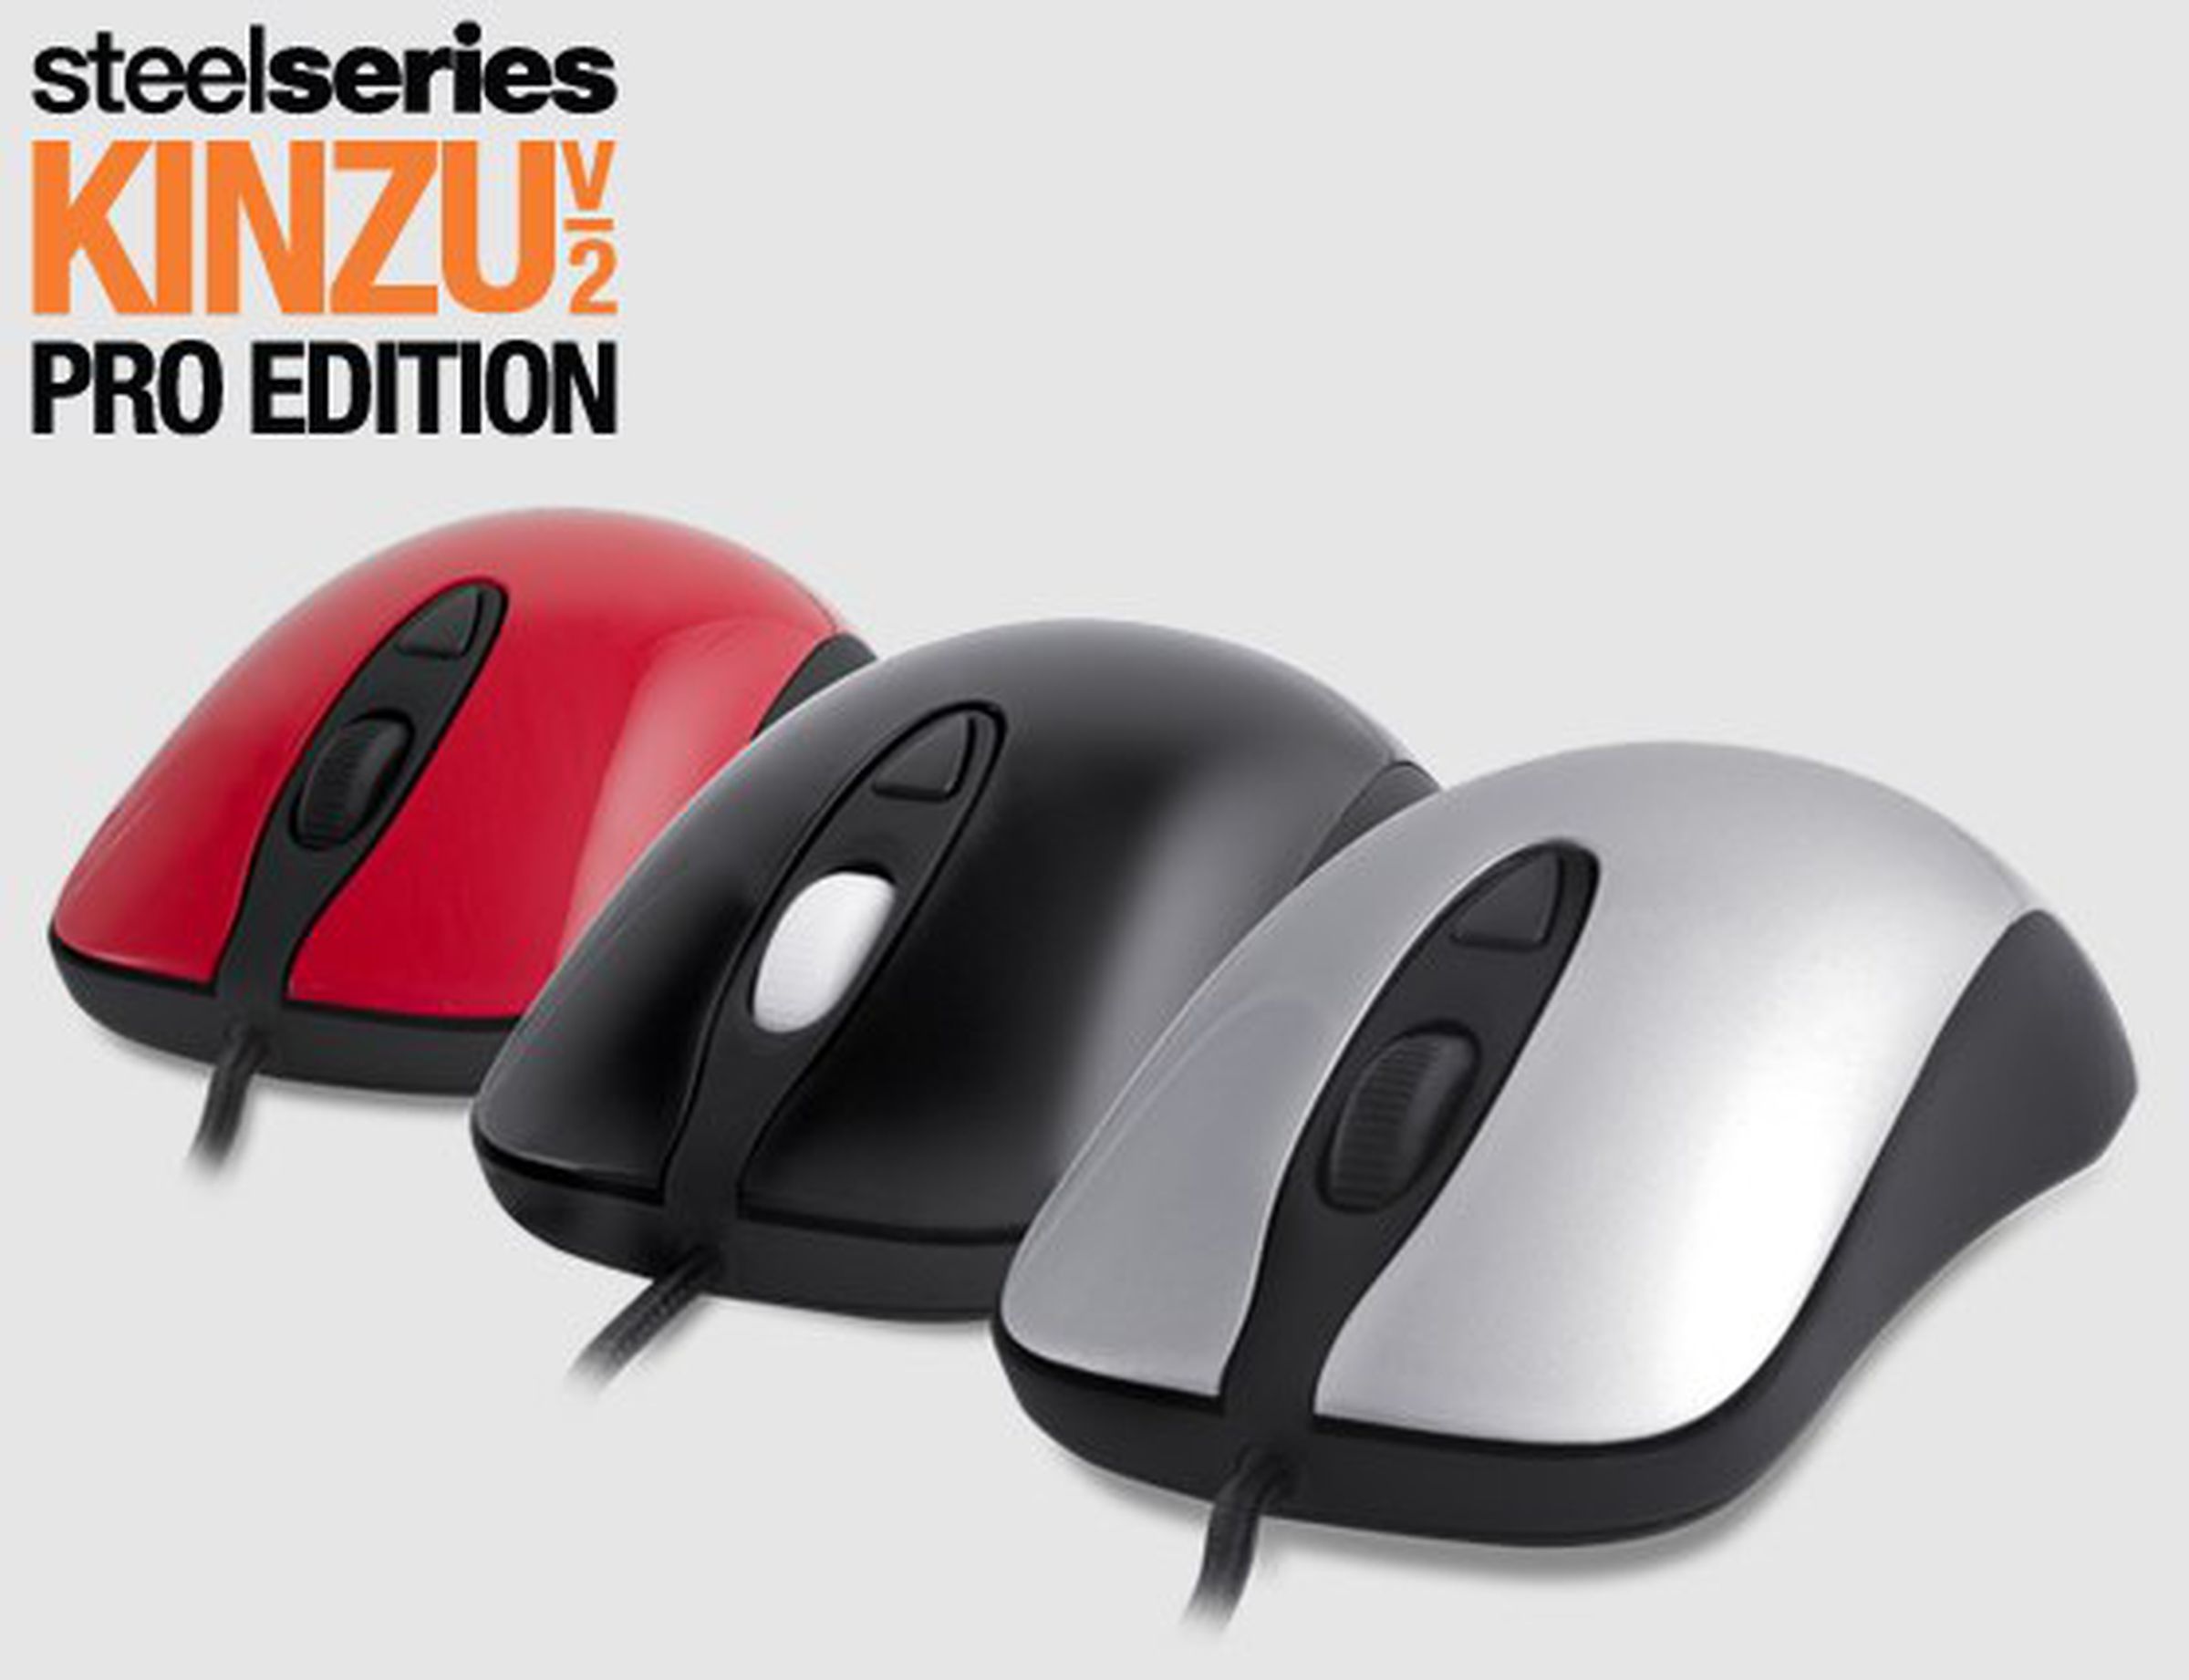 SteelSeries Ion gamepad, mice, and headset press photos